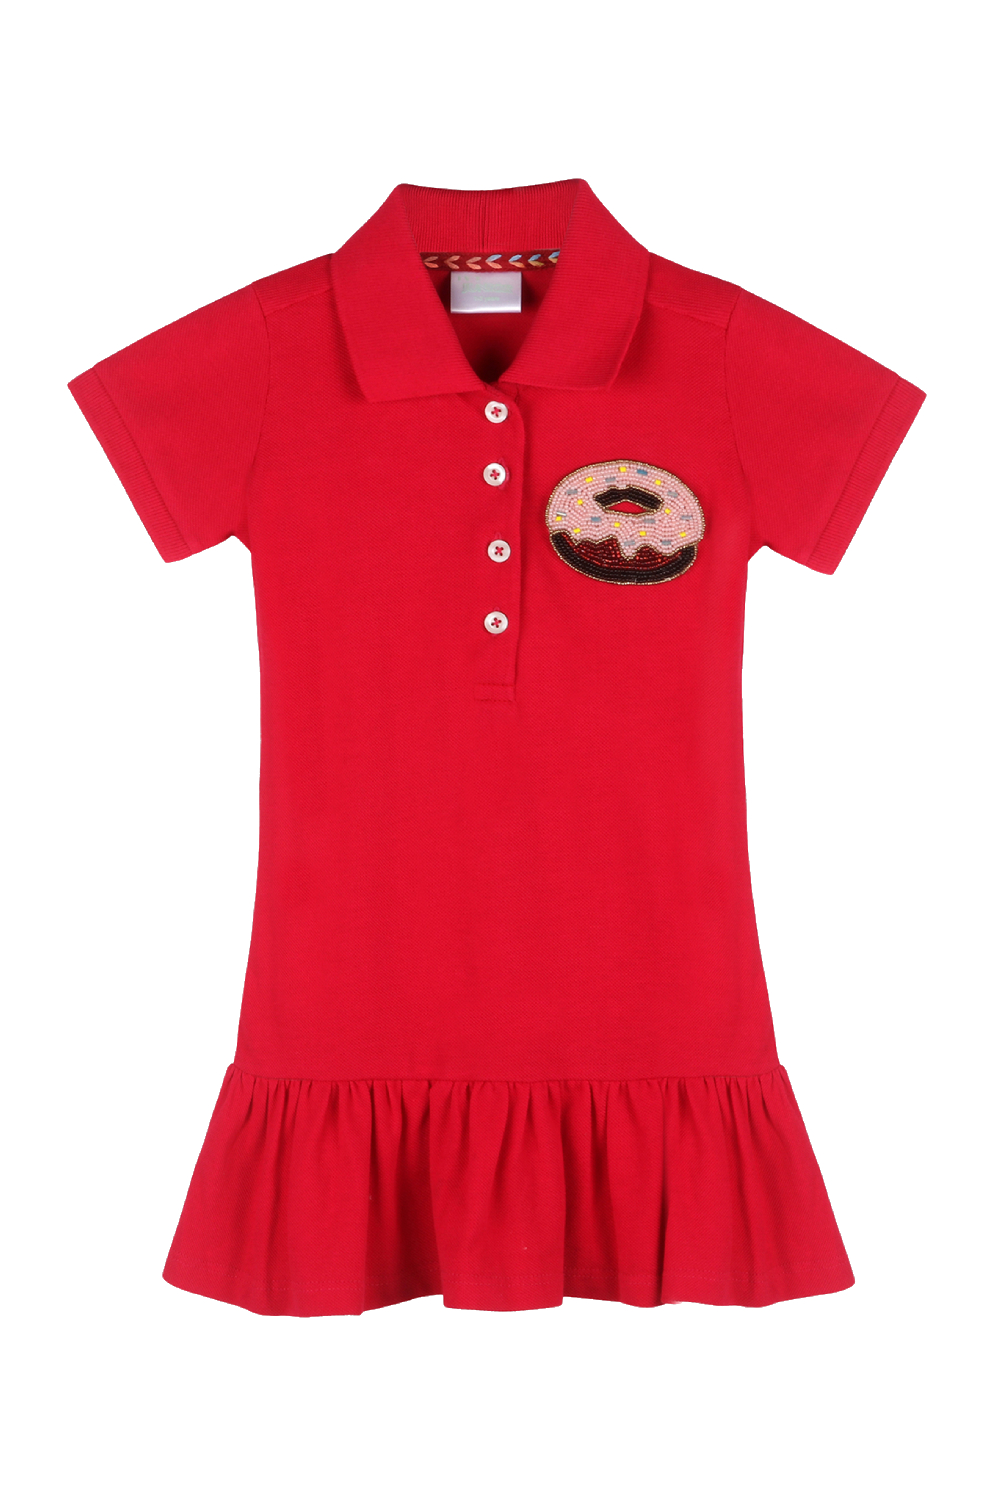 Girls Polo Dress In Red With Ruffles At Hem And Donut Motif